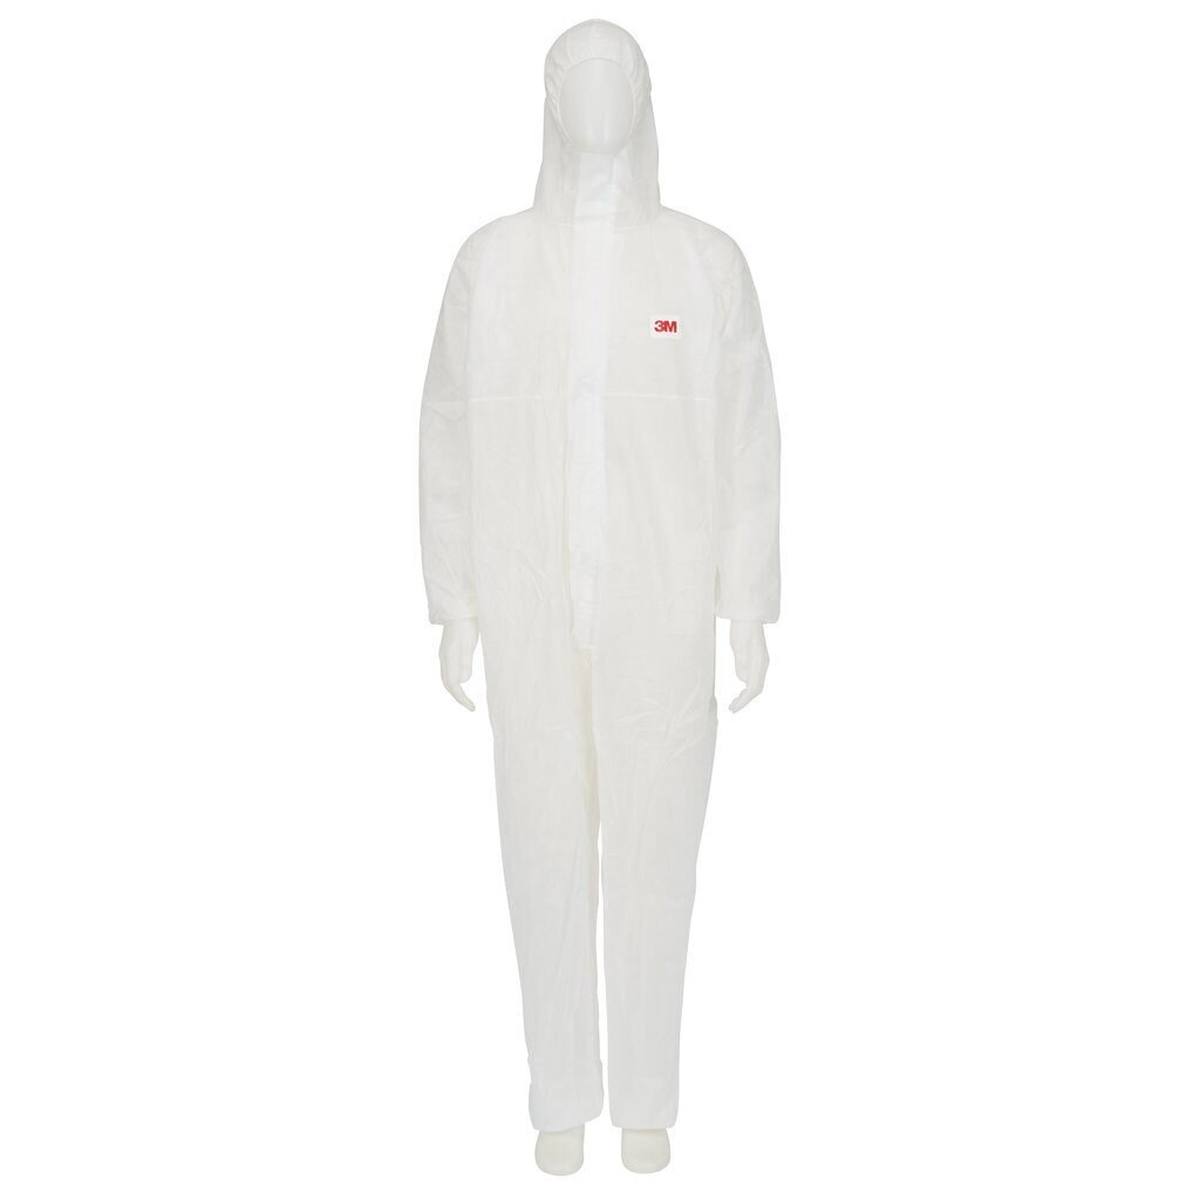 3M 4500 W coverall, white, CE, size 2XL, material polypropylene, elastic band finish